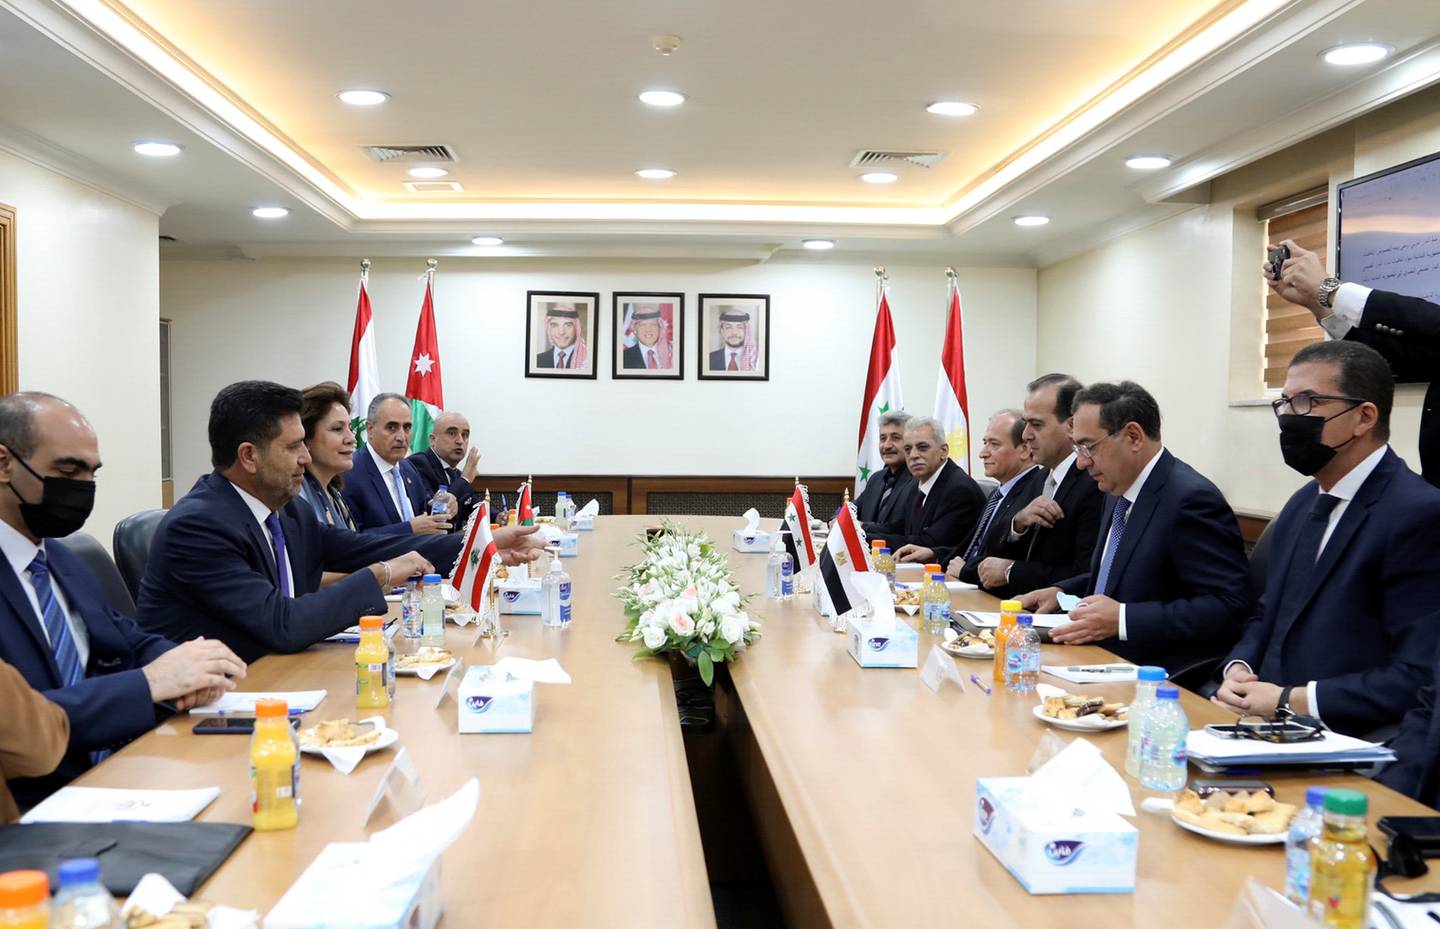 Lebanon's Energy Minister Raymond Ghajar, Jordan's Minister of Energy and Mineral Resources Hala Zawati, Syria's Minister of Oil and Mineral Resources Bassam Tohme and Egypt's Minister of Petroleum and Mineral Resources,Tarek El Molla meet in Amman, Jordan on Wednesday.  Reuters